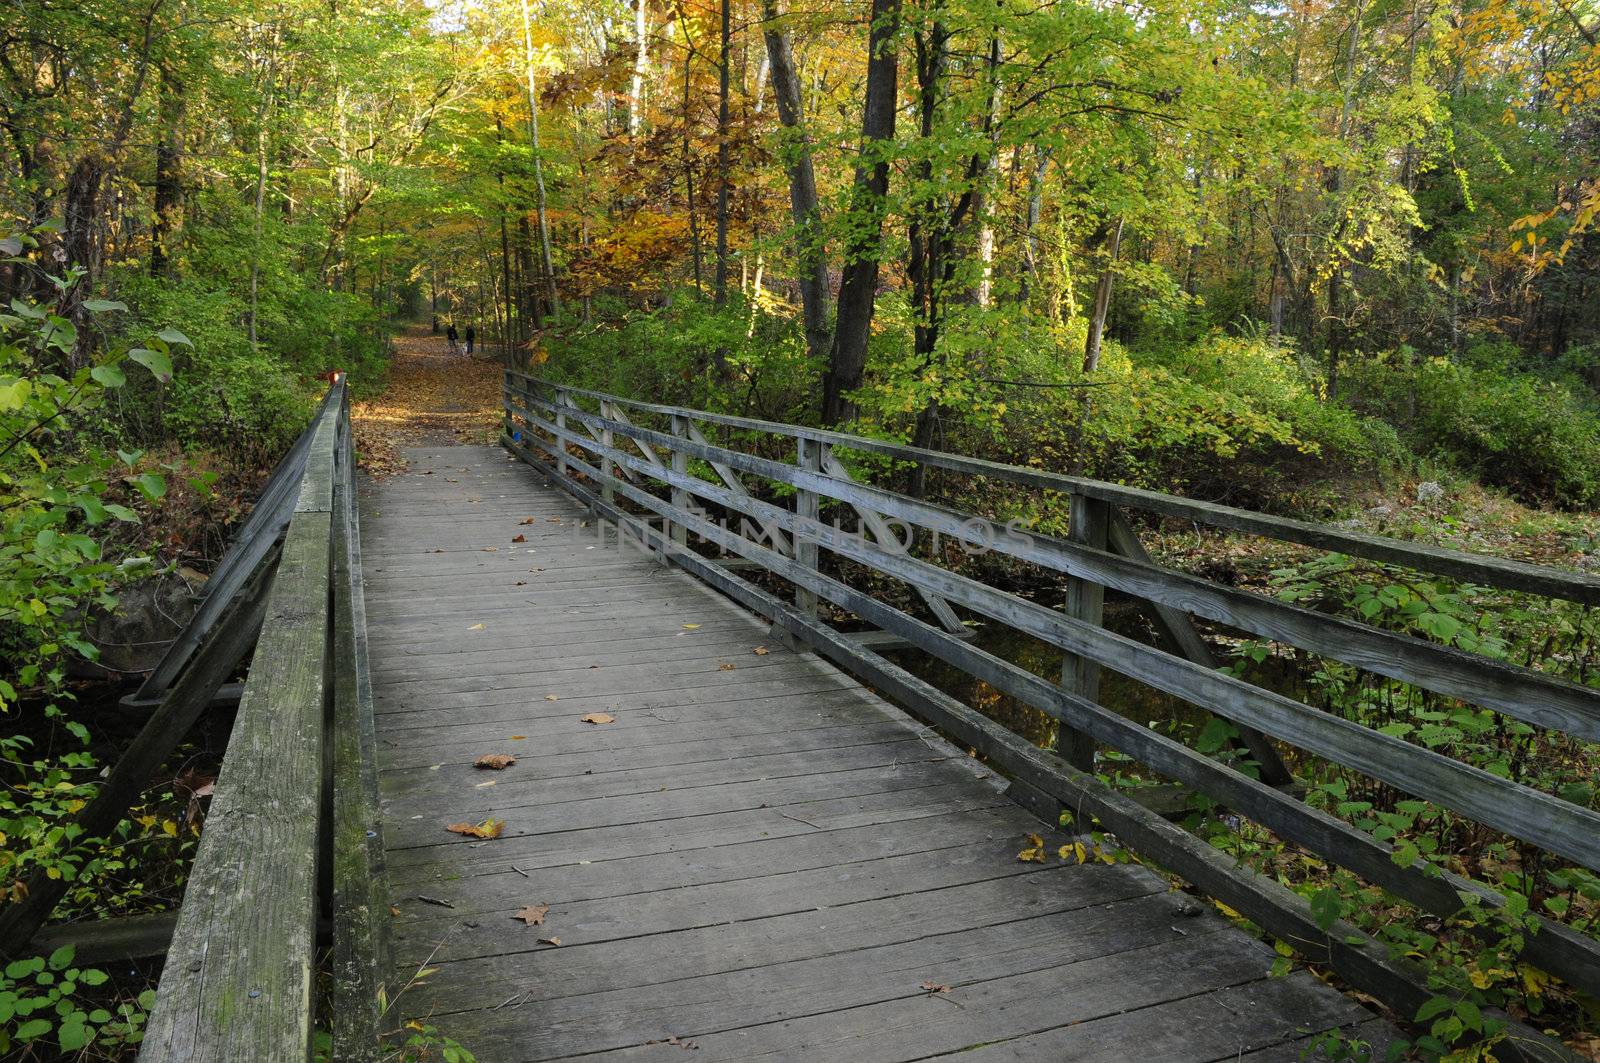 A foot bridge in the forest